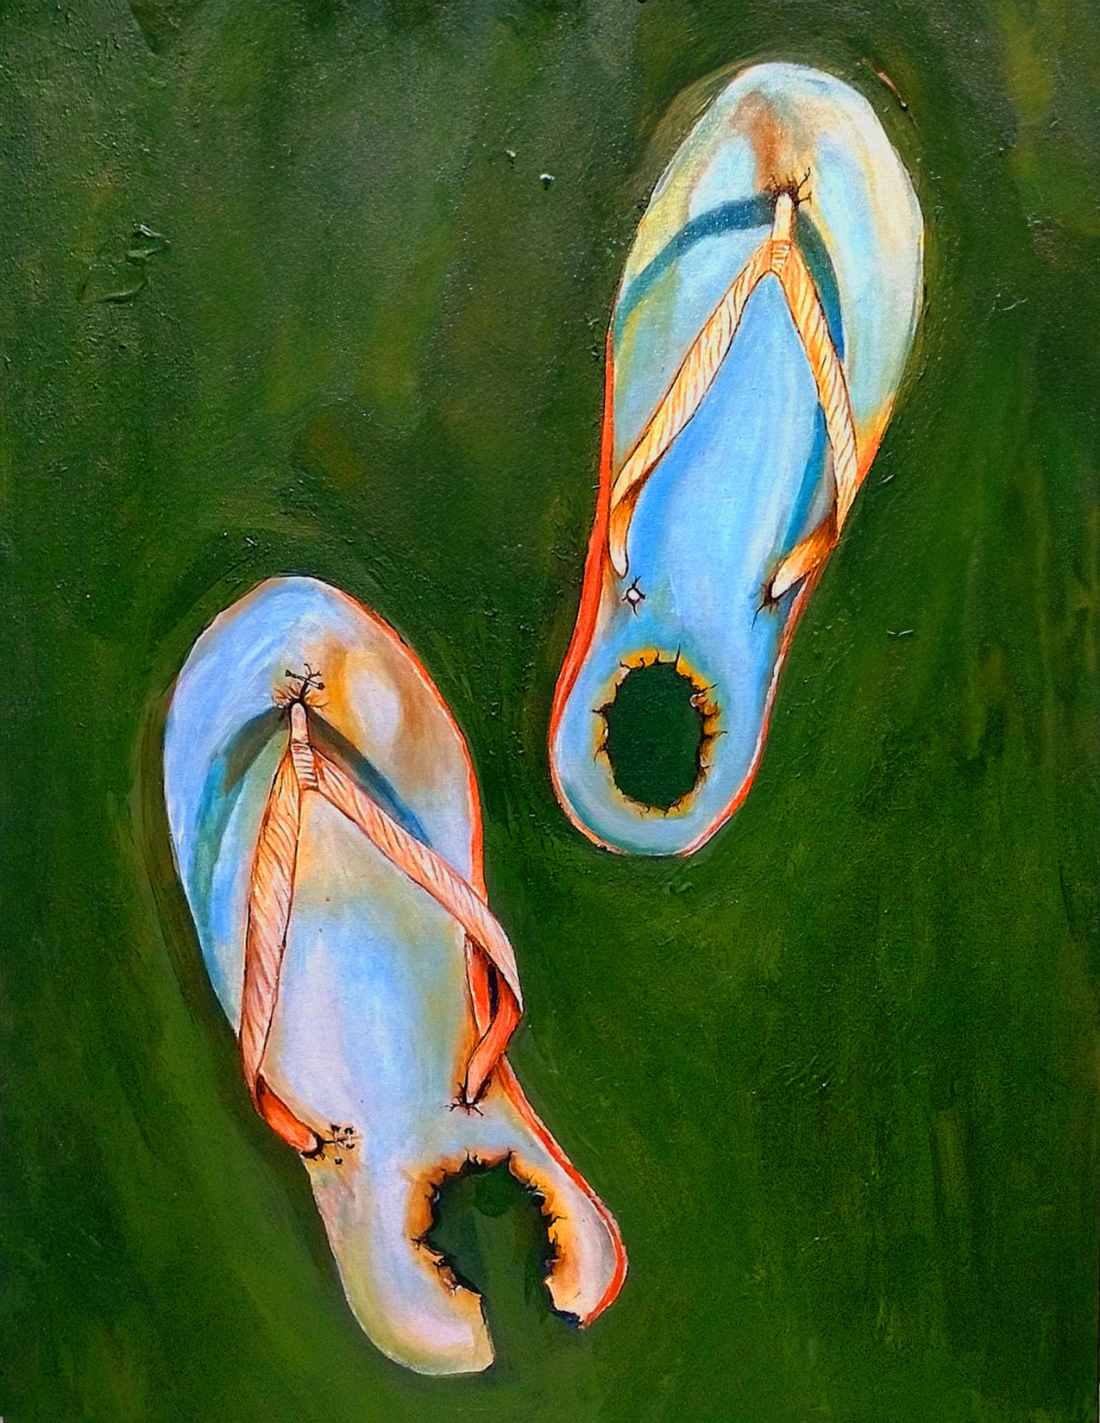 painting of two worn out flip flops with holes in the heels